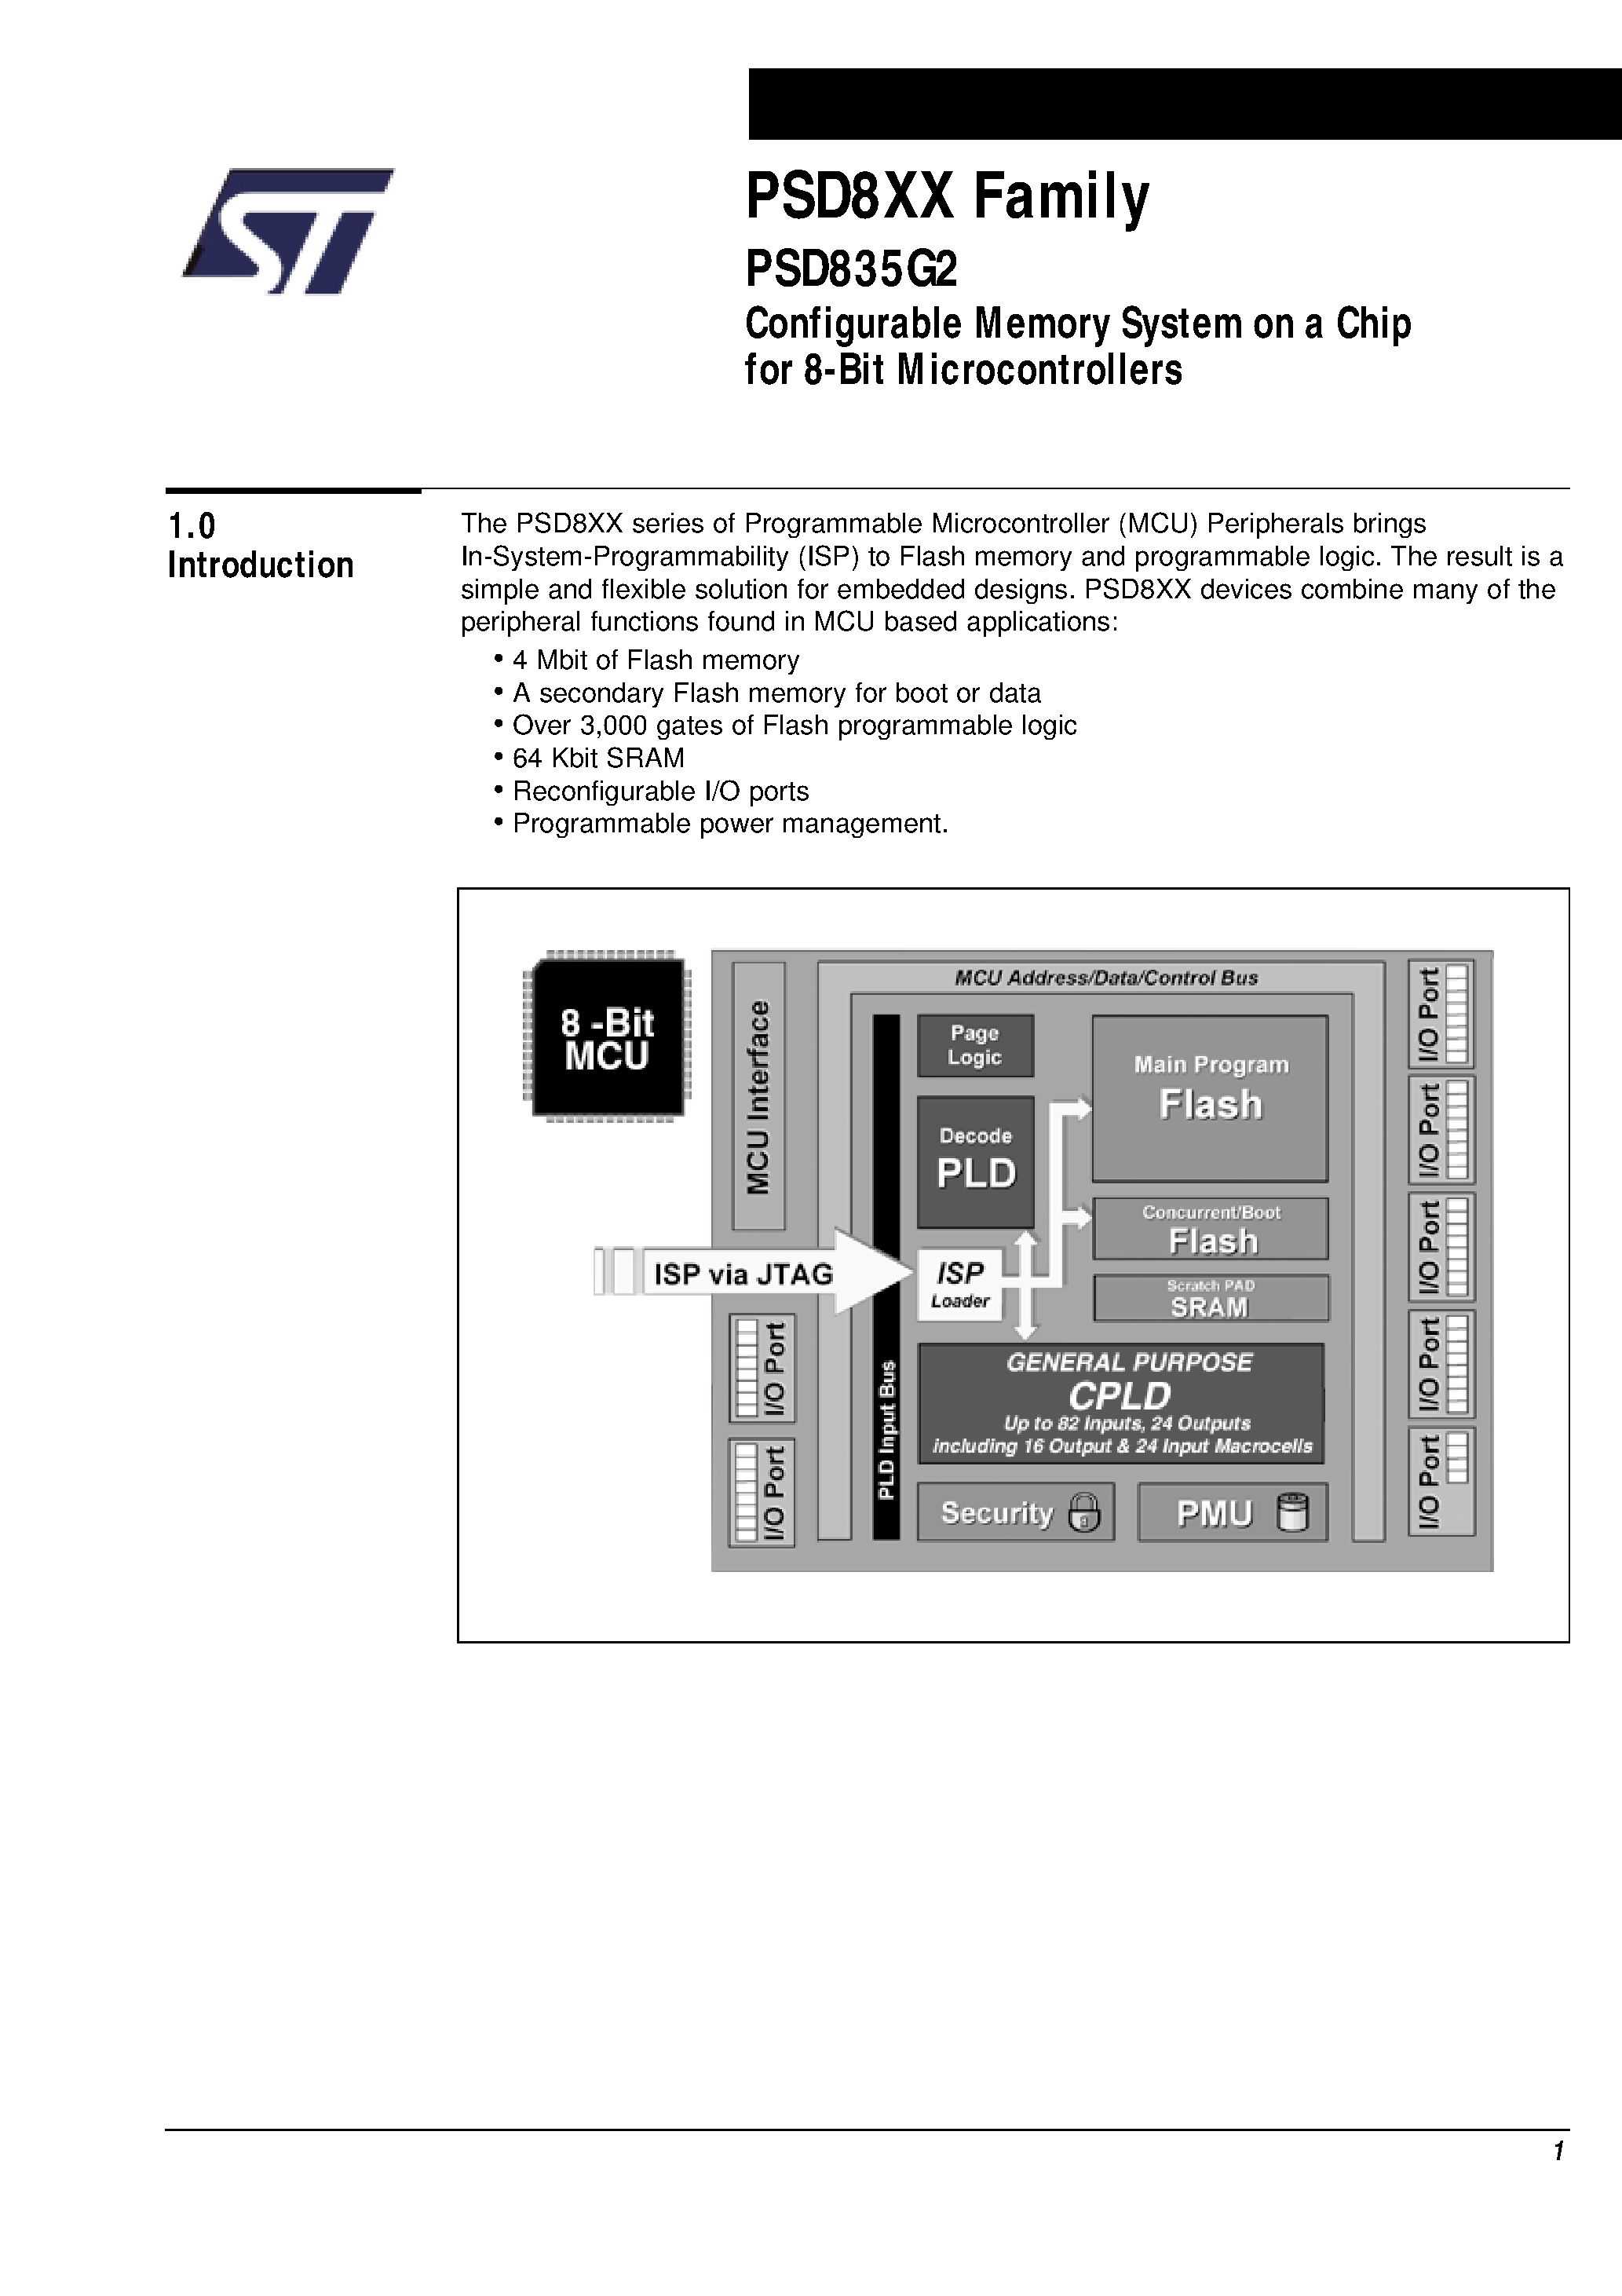 Datasheet PSD835F2V-A-15U - Configurable Memory System on a Chip for 8-Bit Microcontrollers page 2